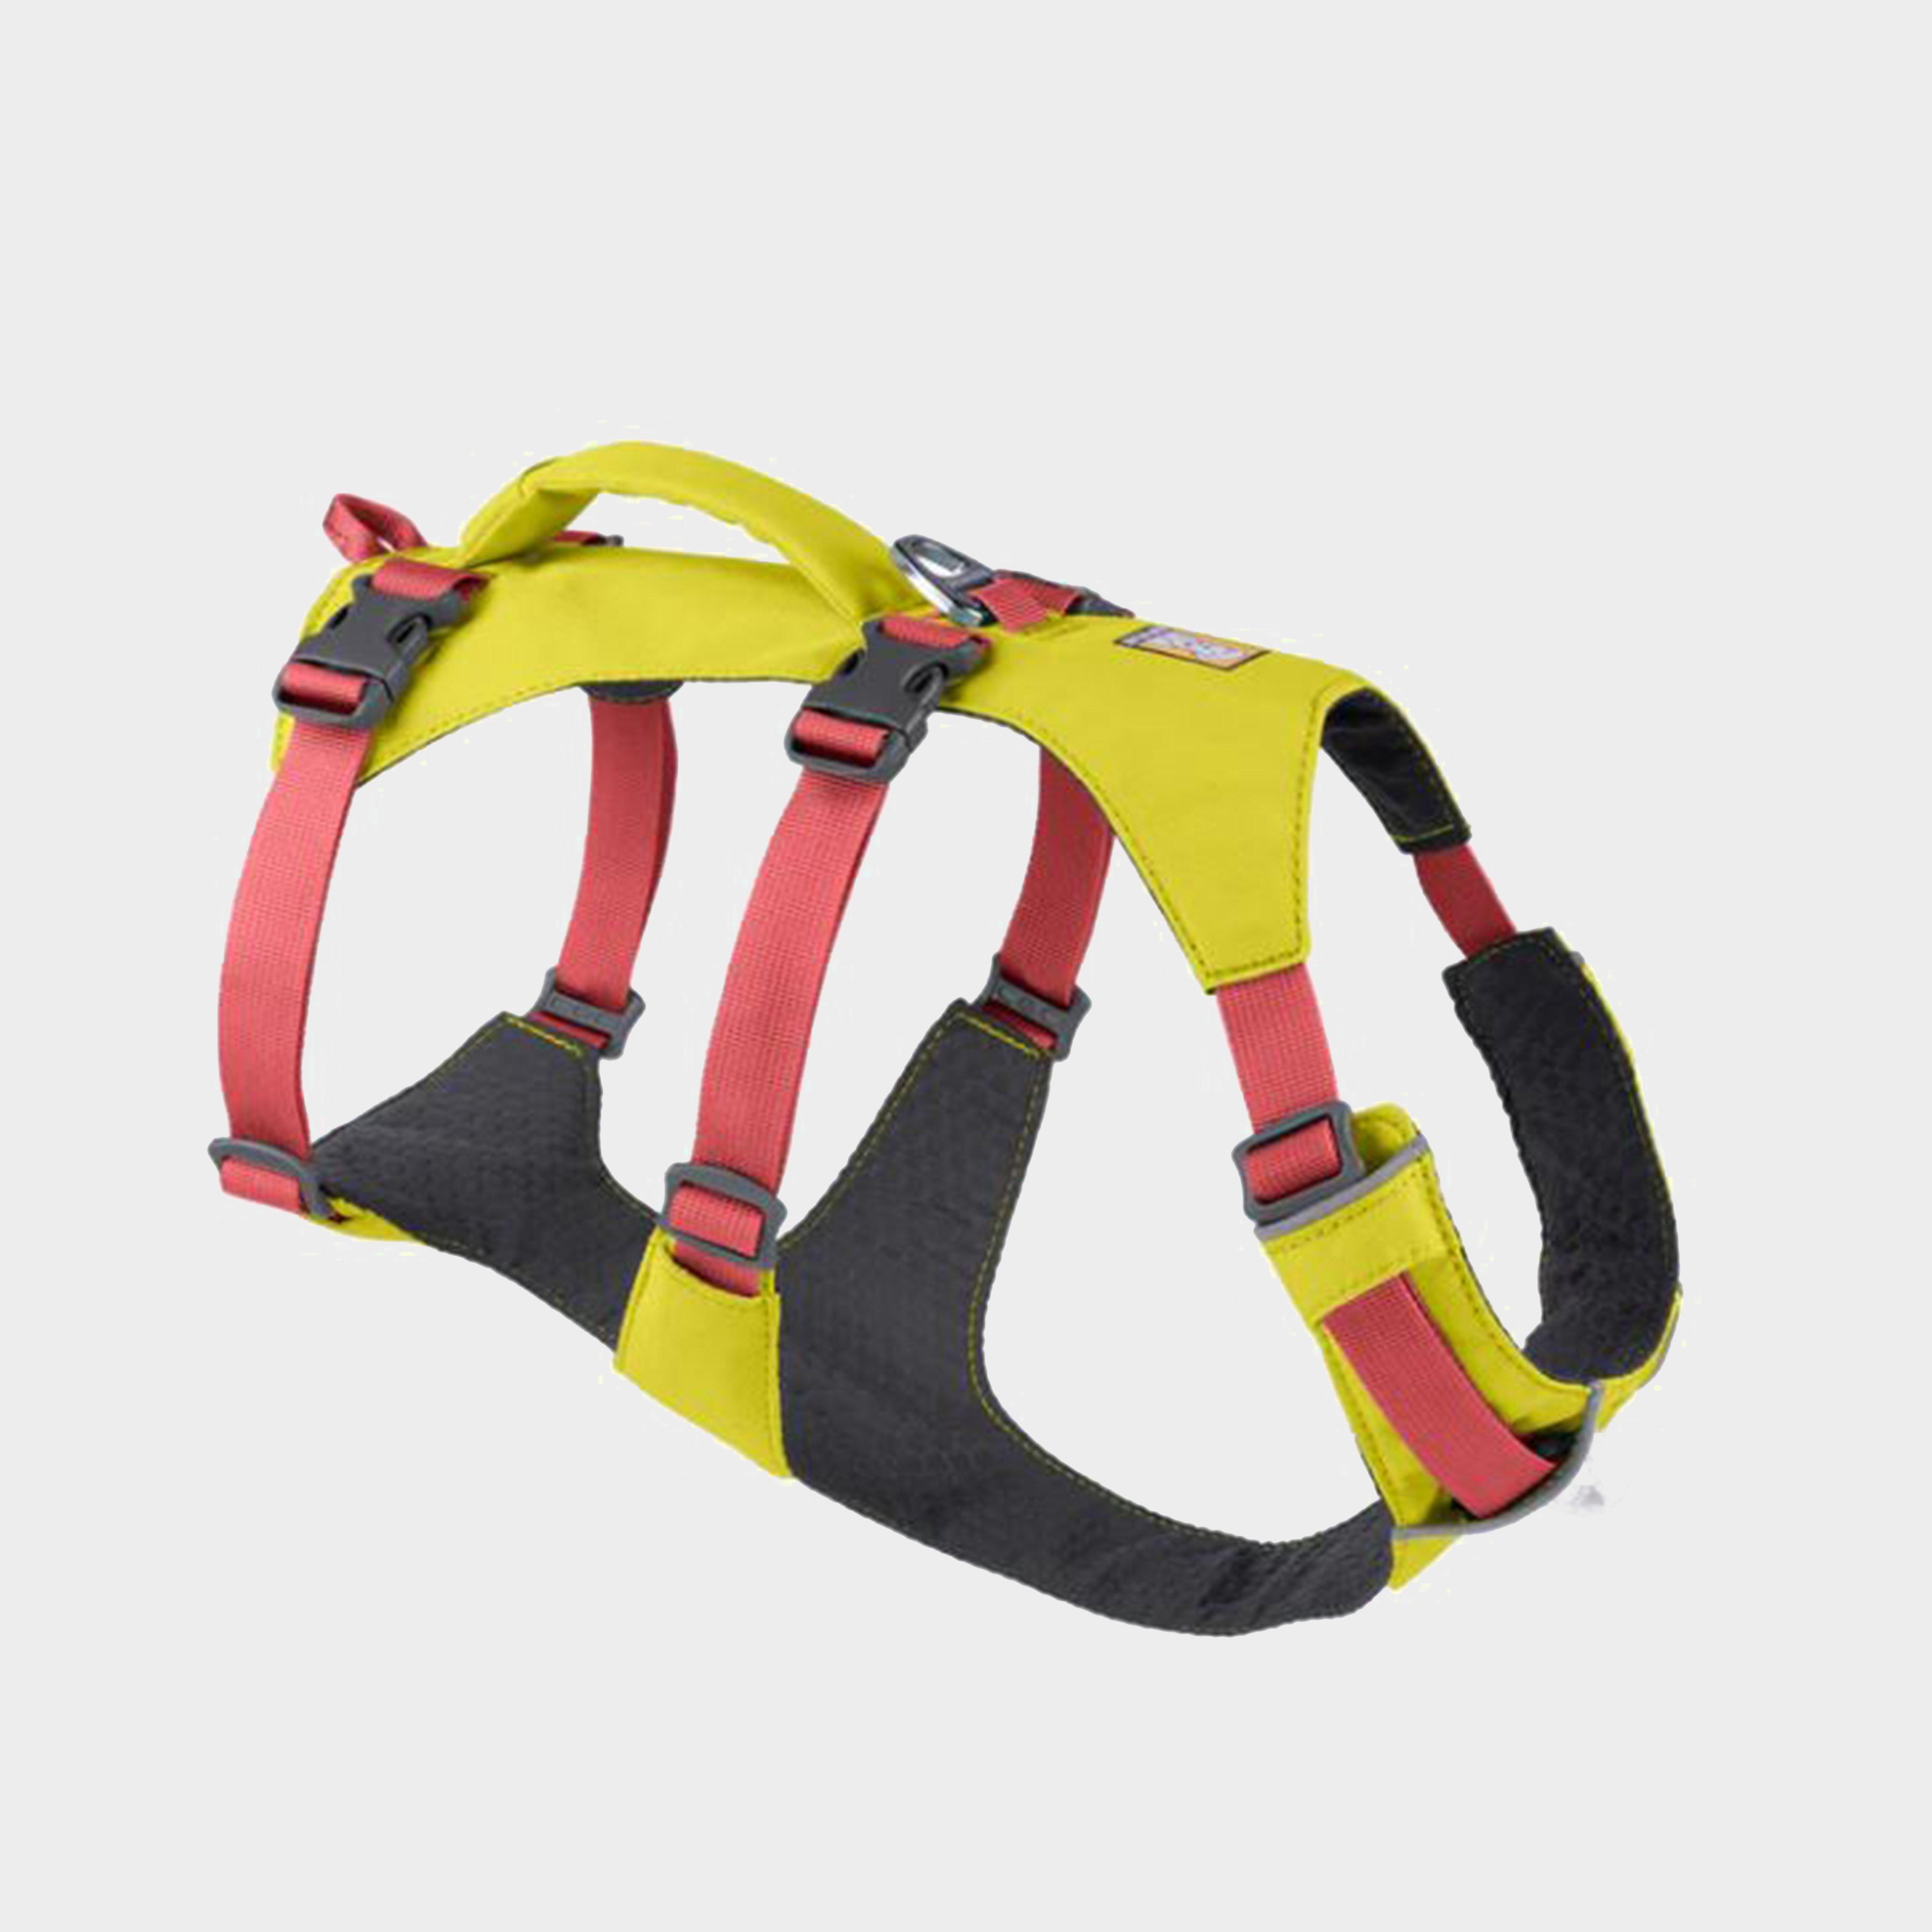 Ruffwear Flagline Dog Harness With Handle - Green/red  Green/red